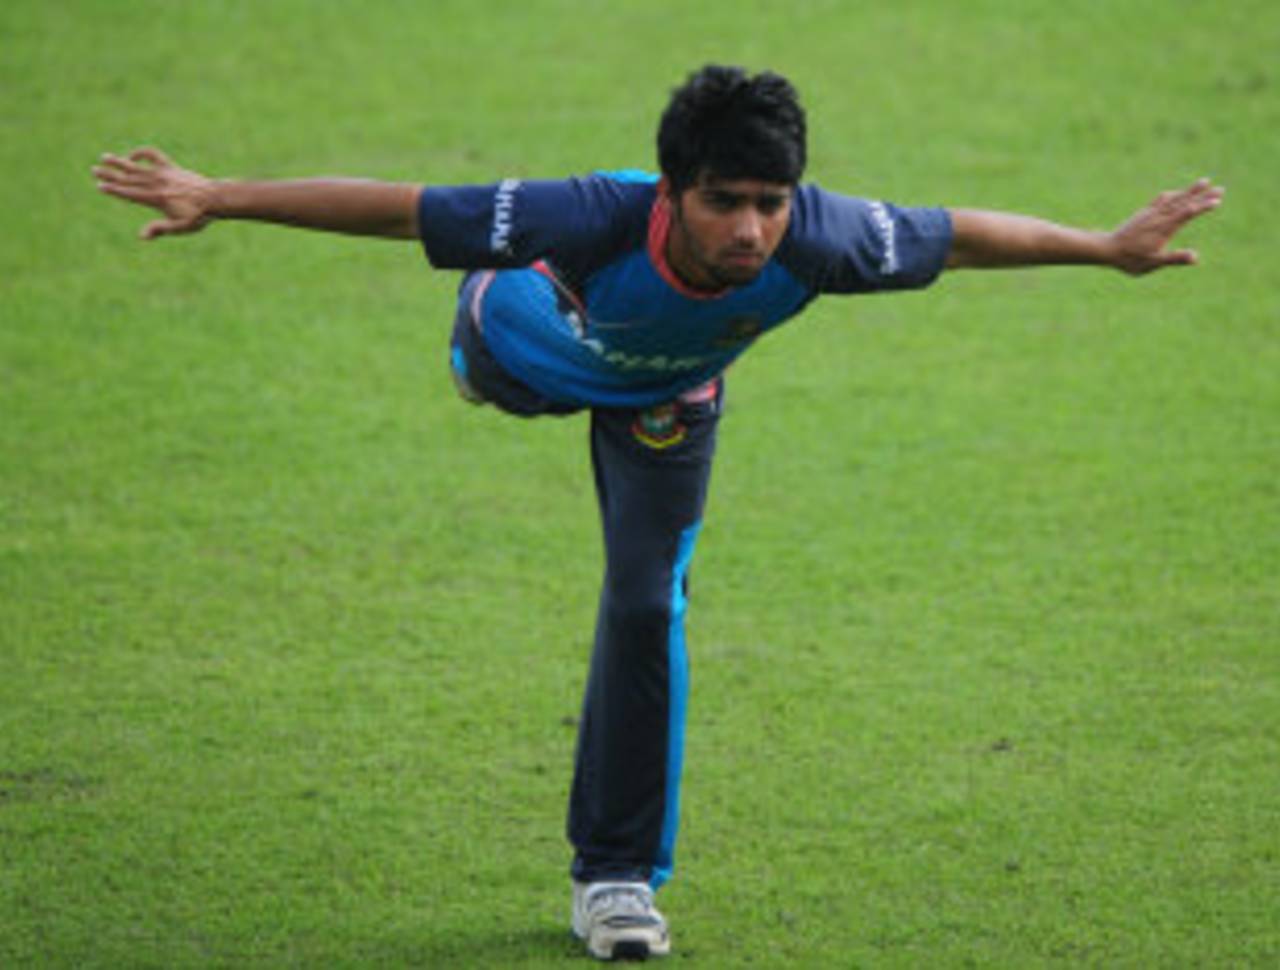 Mominul Haque stretches during a training session, Dhaka, October 28, 2013